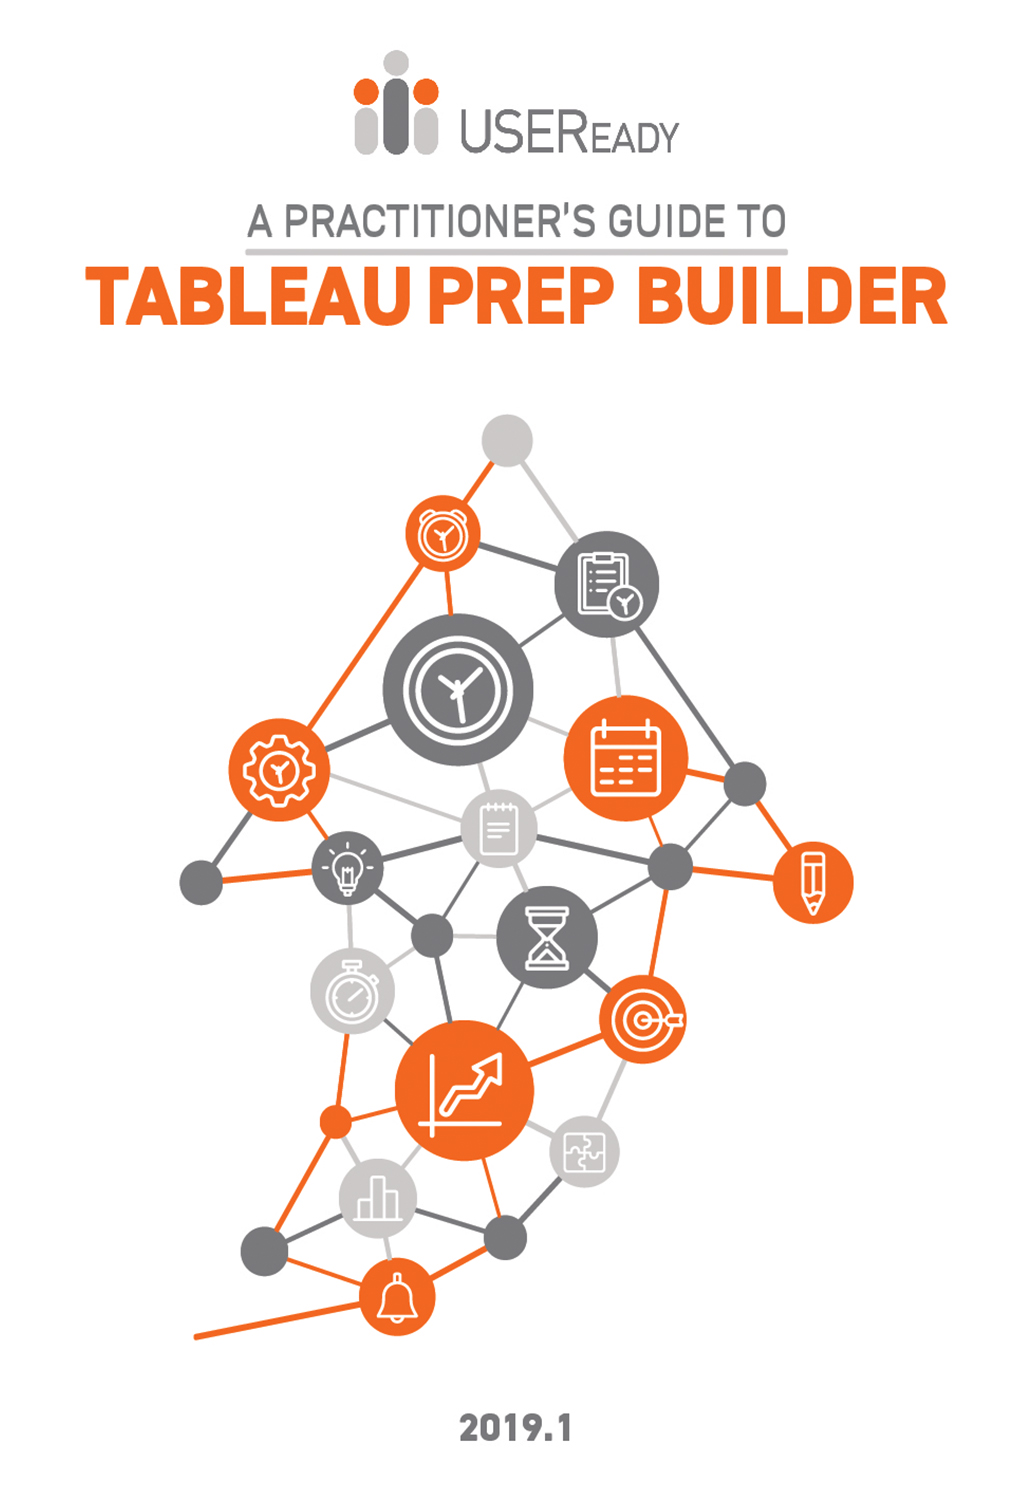 A Practitioner’s Guide to Tableau Prep Builder 2019.1